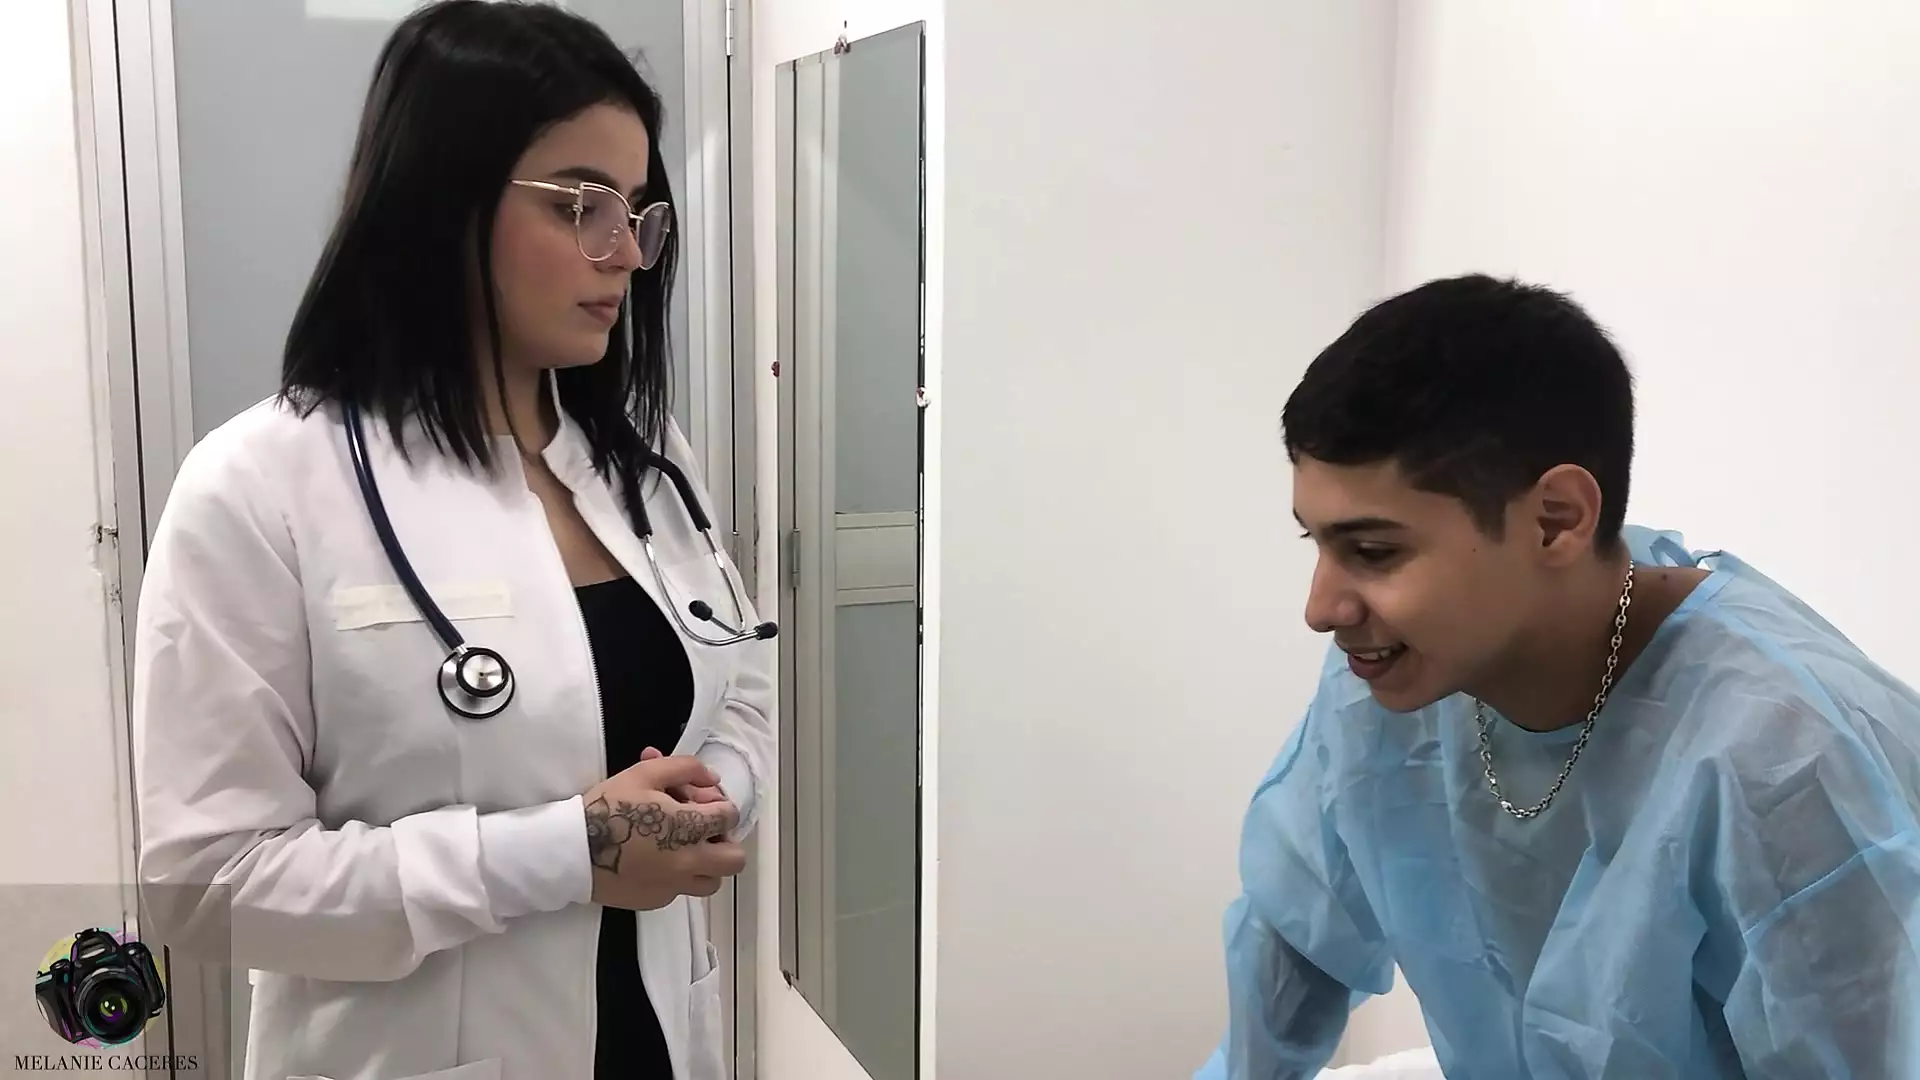 Girl Doctor - Doctor Help Me With My Erection Problem - Porn In Spanish | xHamster